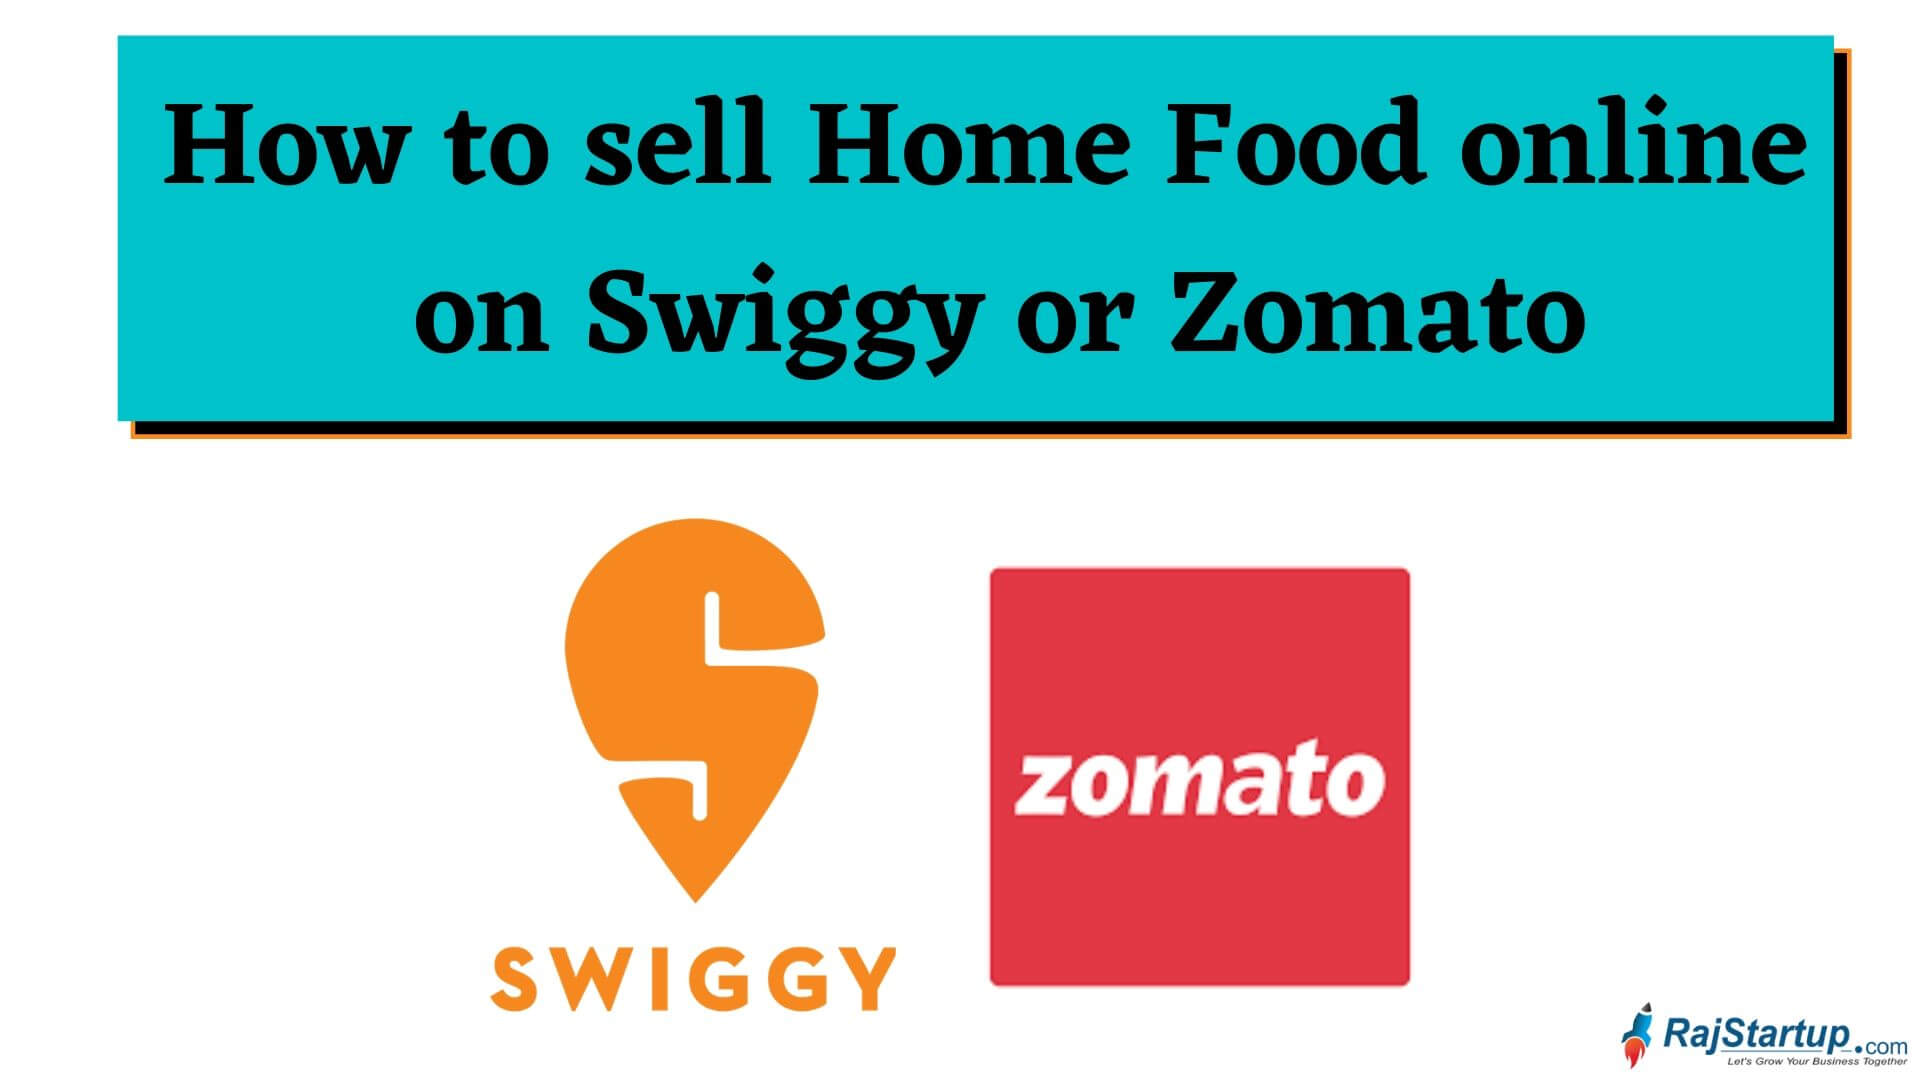 How to sell Home food online on Swiggy or Zomato